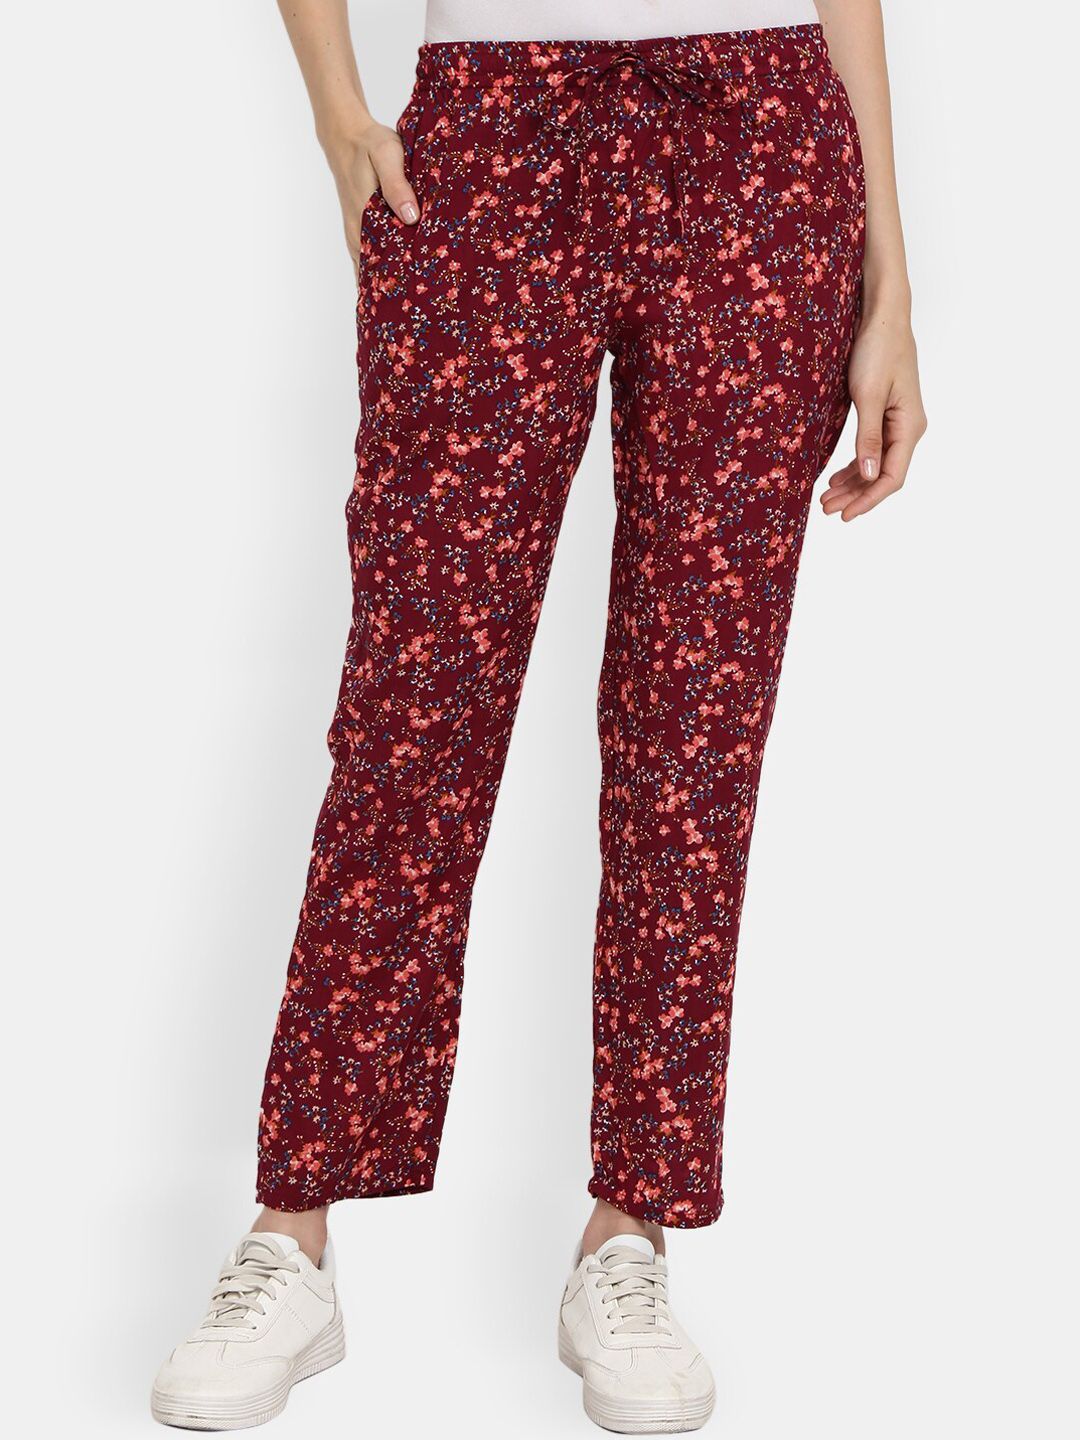 V-Mart Women Maroon Printed Lounge Pants Price in India